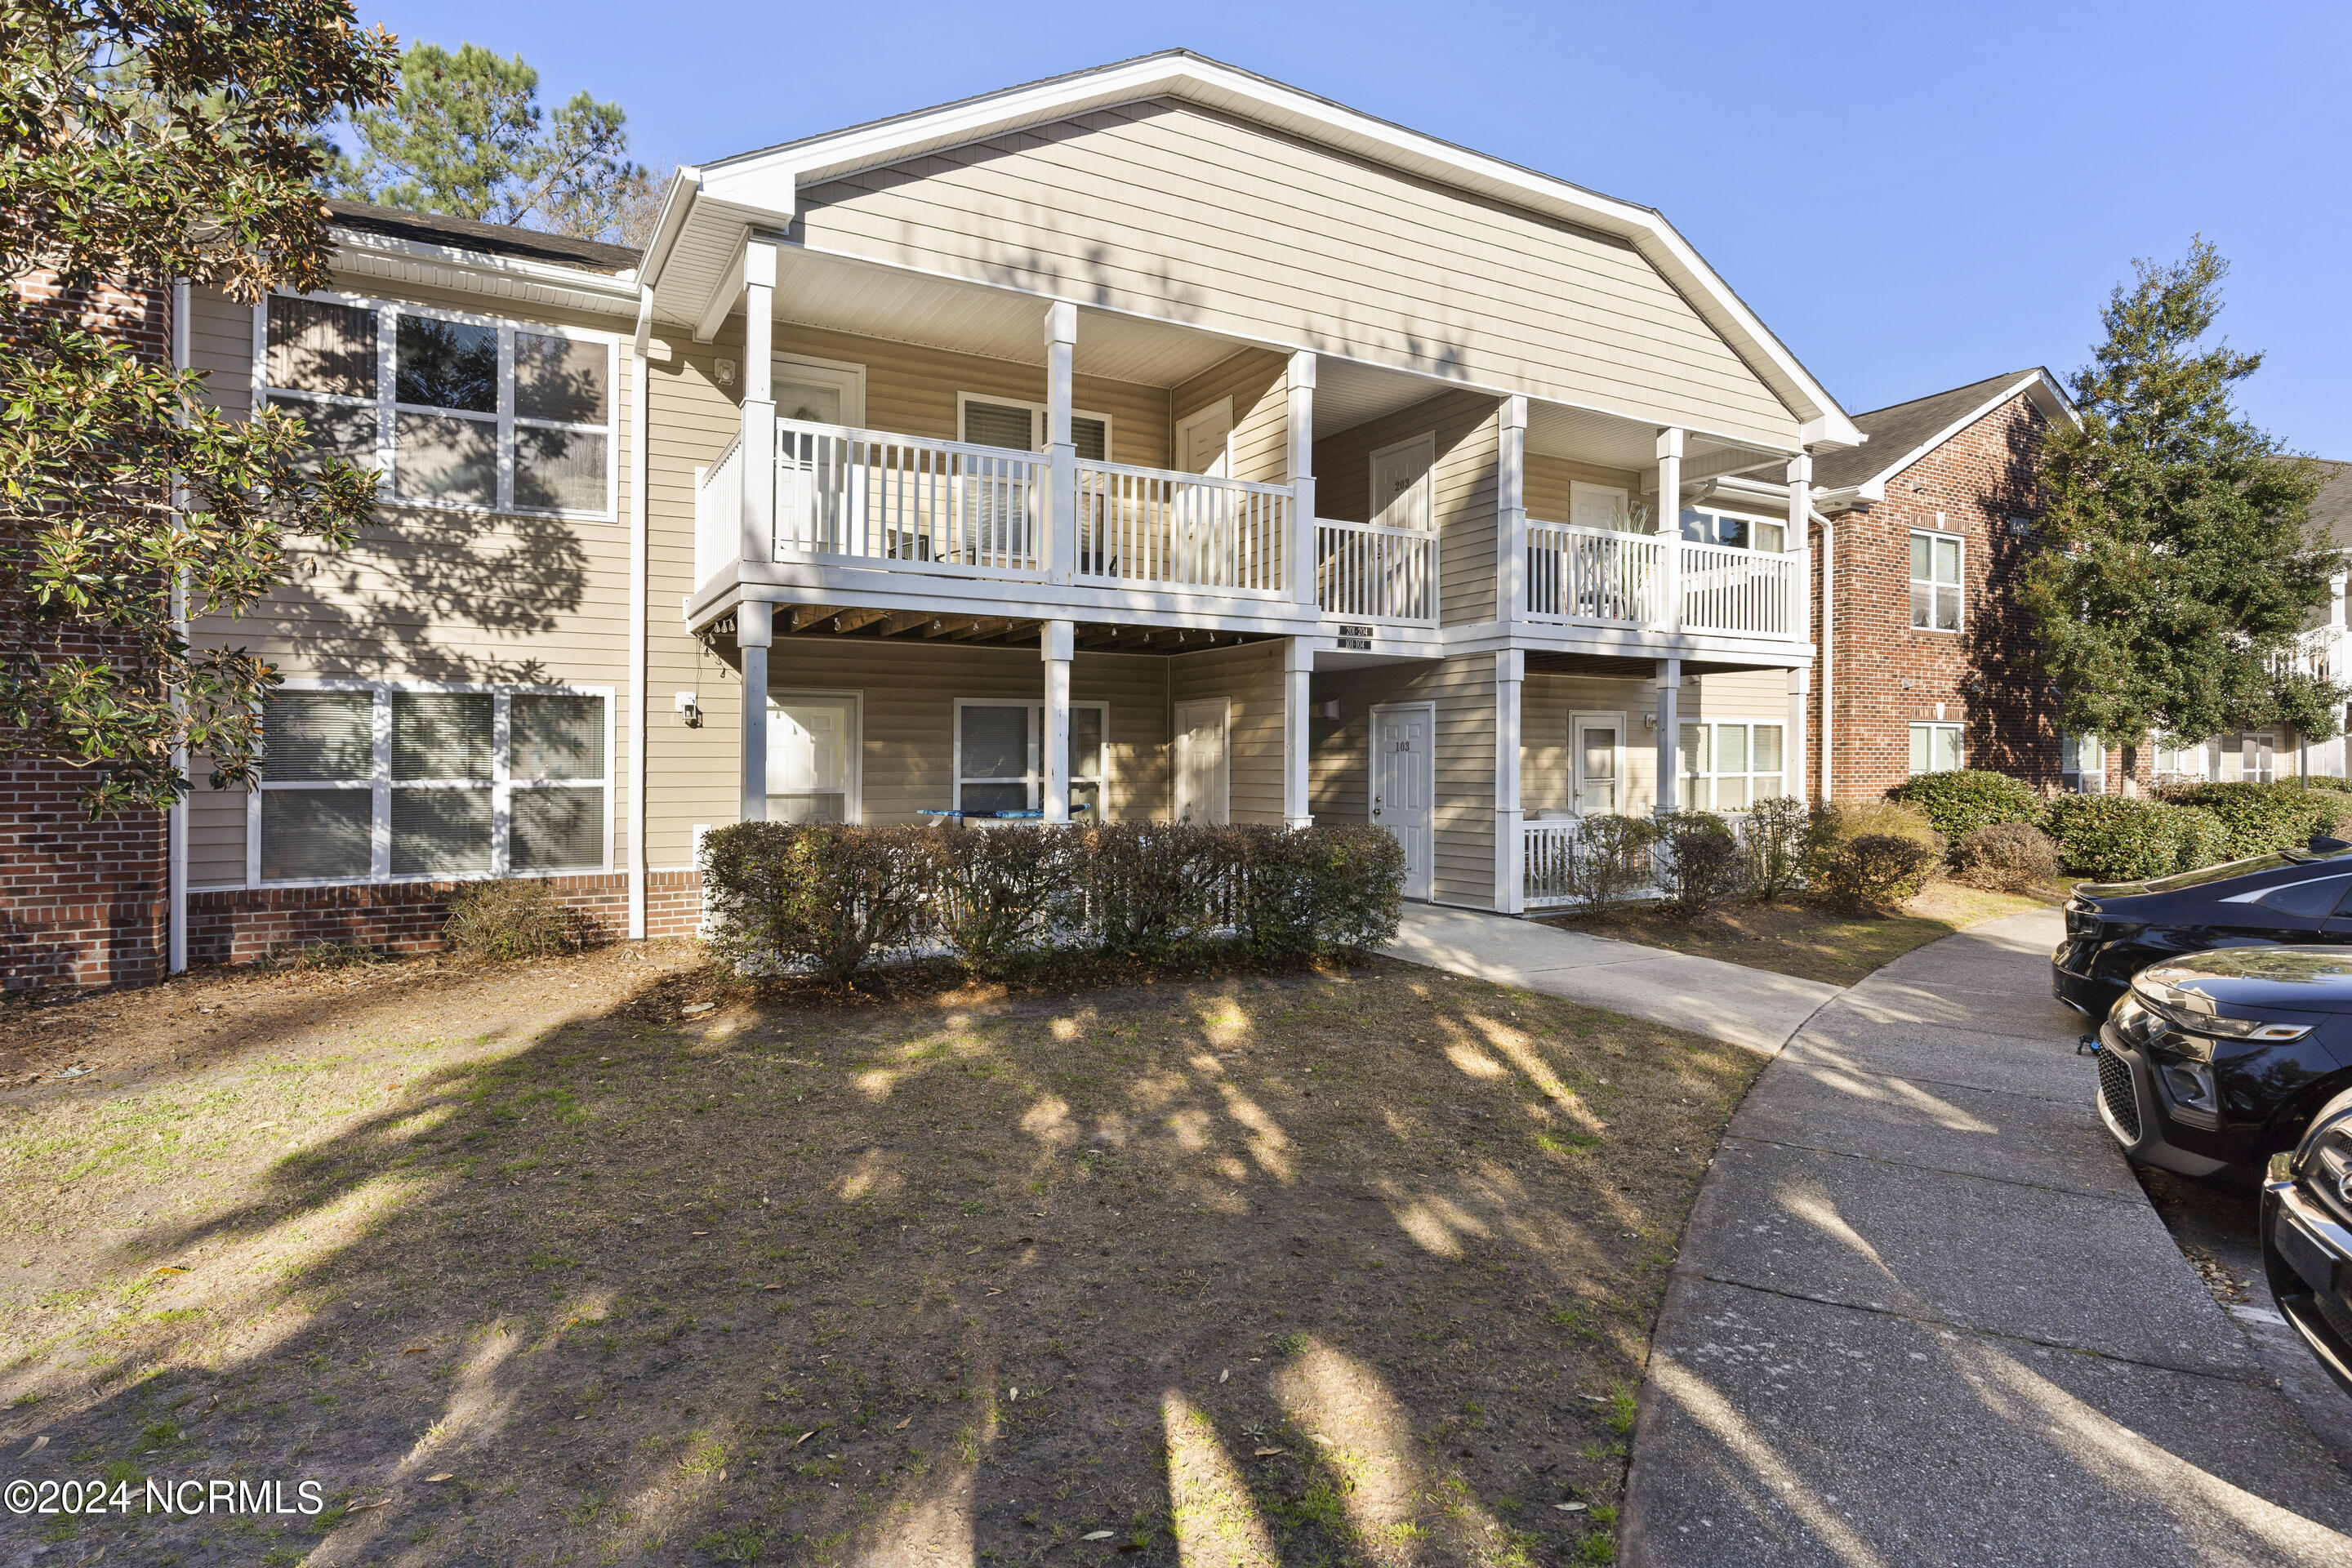 Picture of 4420 Jay Bird Circle Unit 102